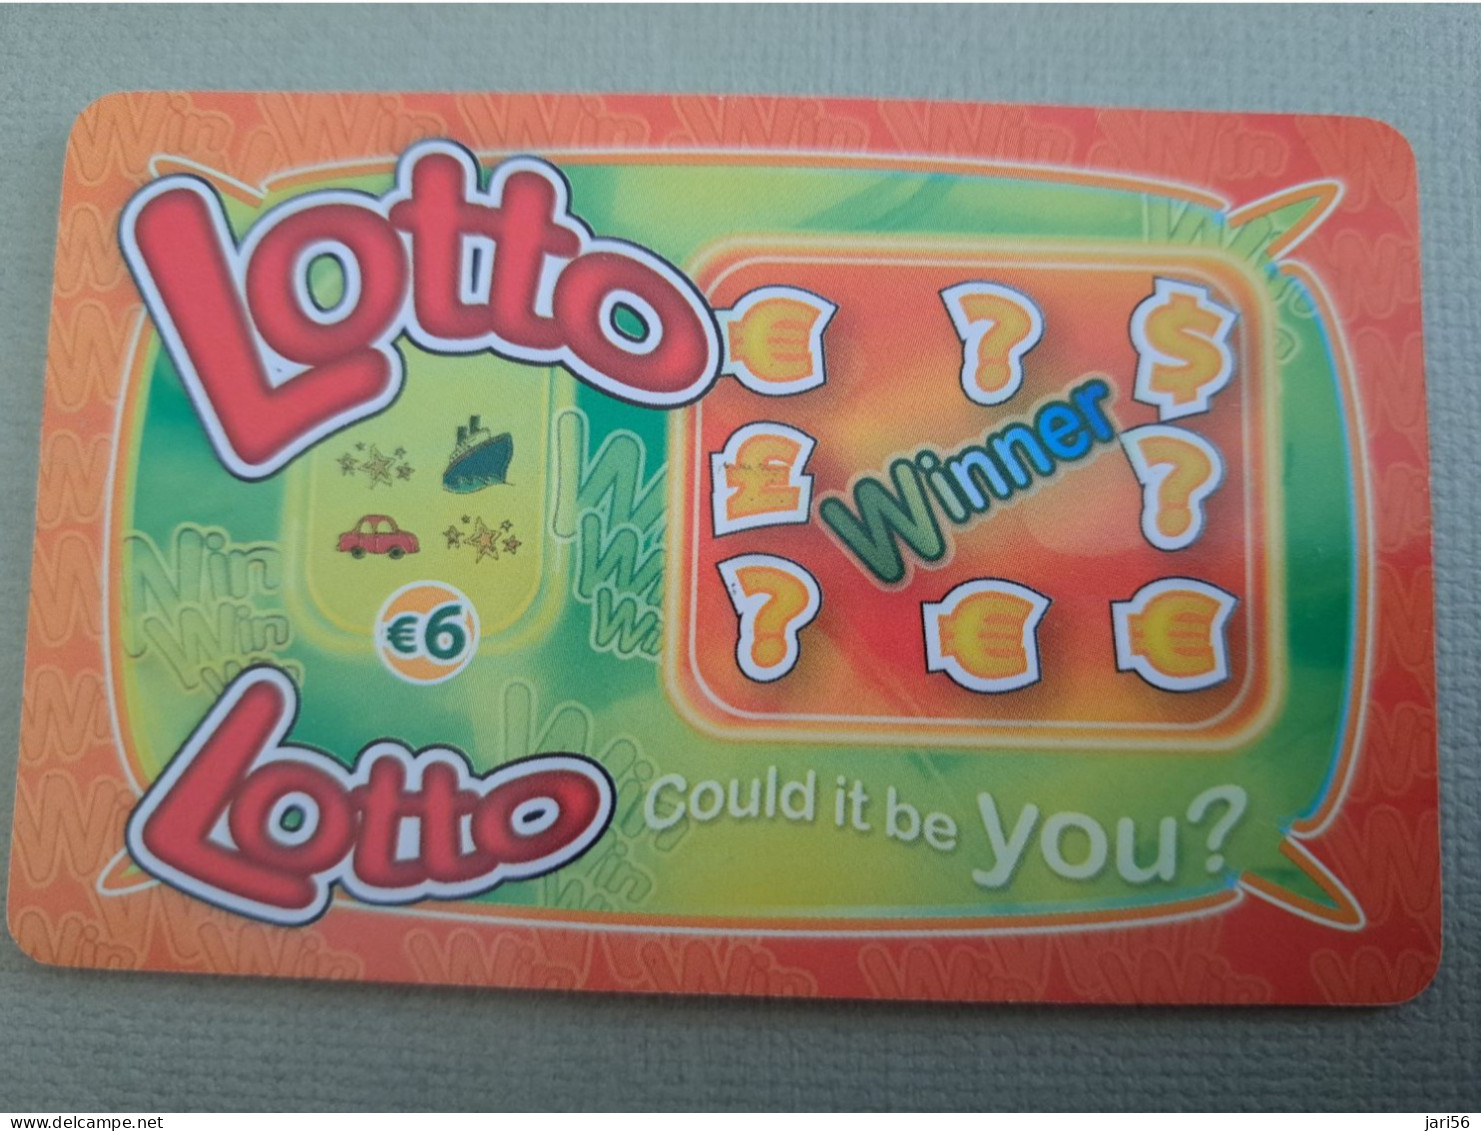 NETHERLANDS /  PREPAID / LOTTO/ COULD IT BE YOU/ WINNER?/ GAMBLING /  € 6,-  USED  ** 15257** - Privadas